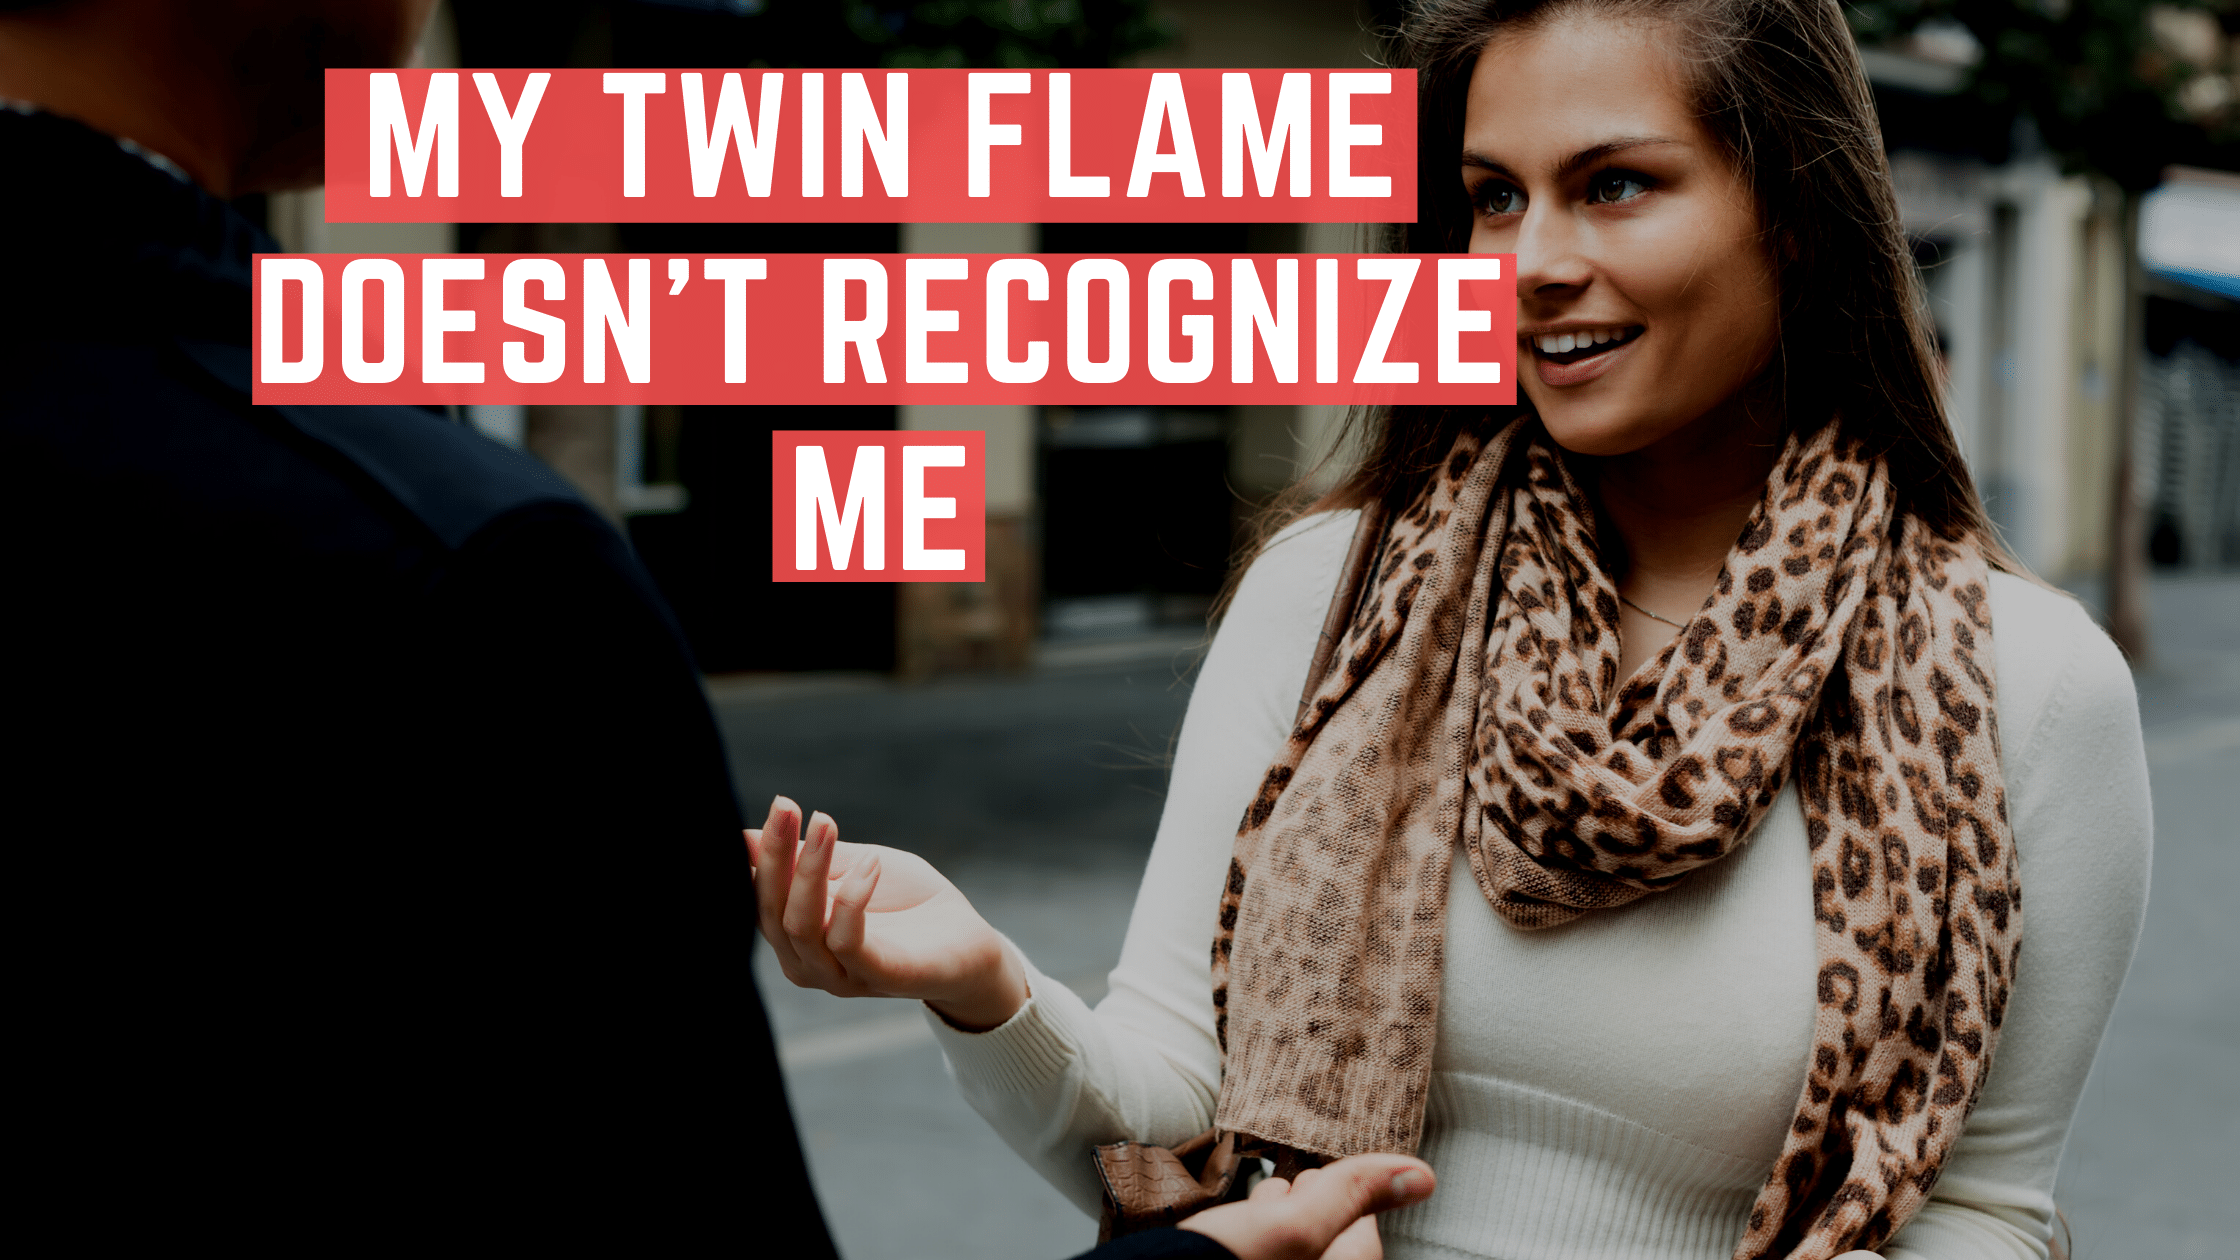 My Twin Flame Doesn't Recognize Me